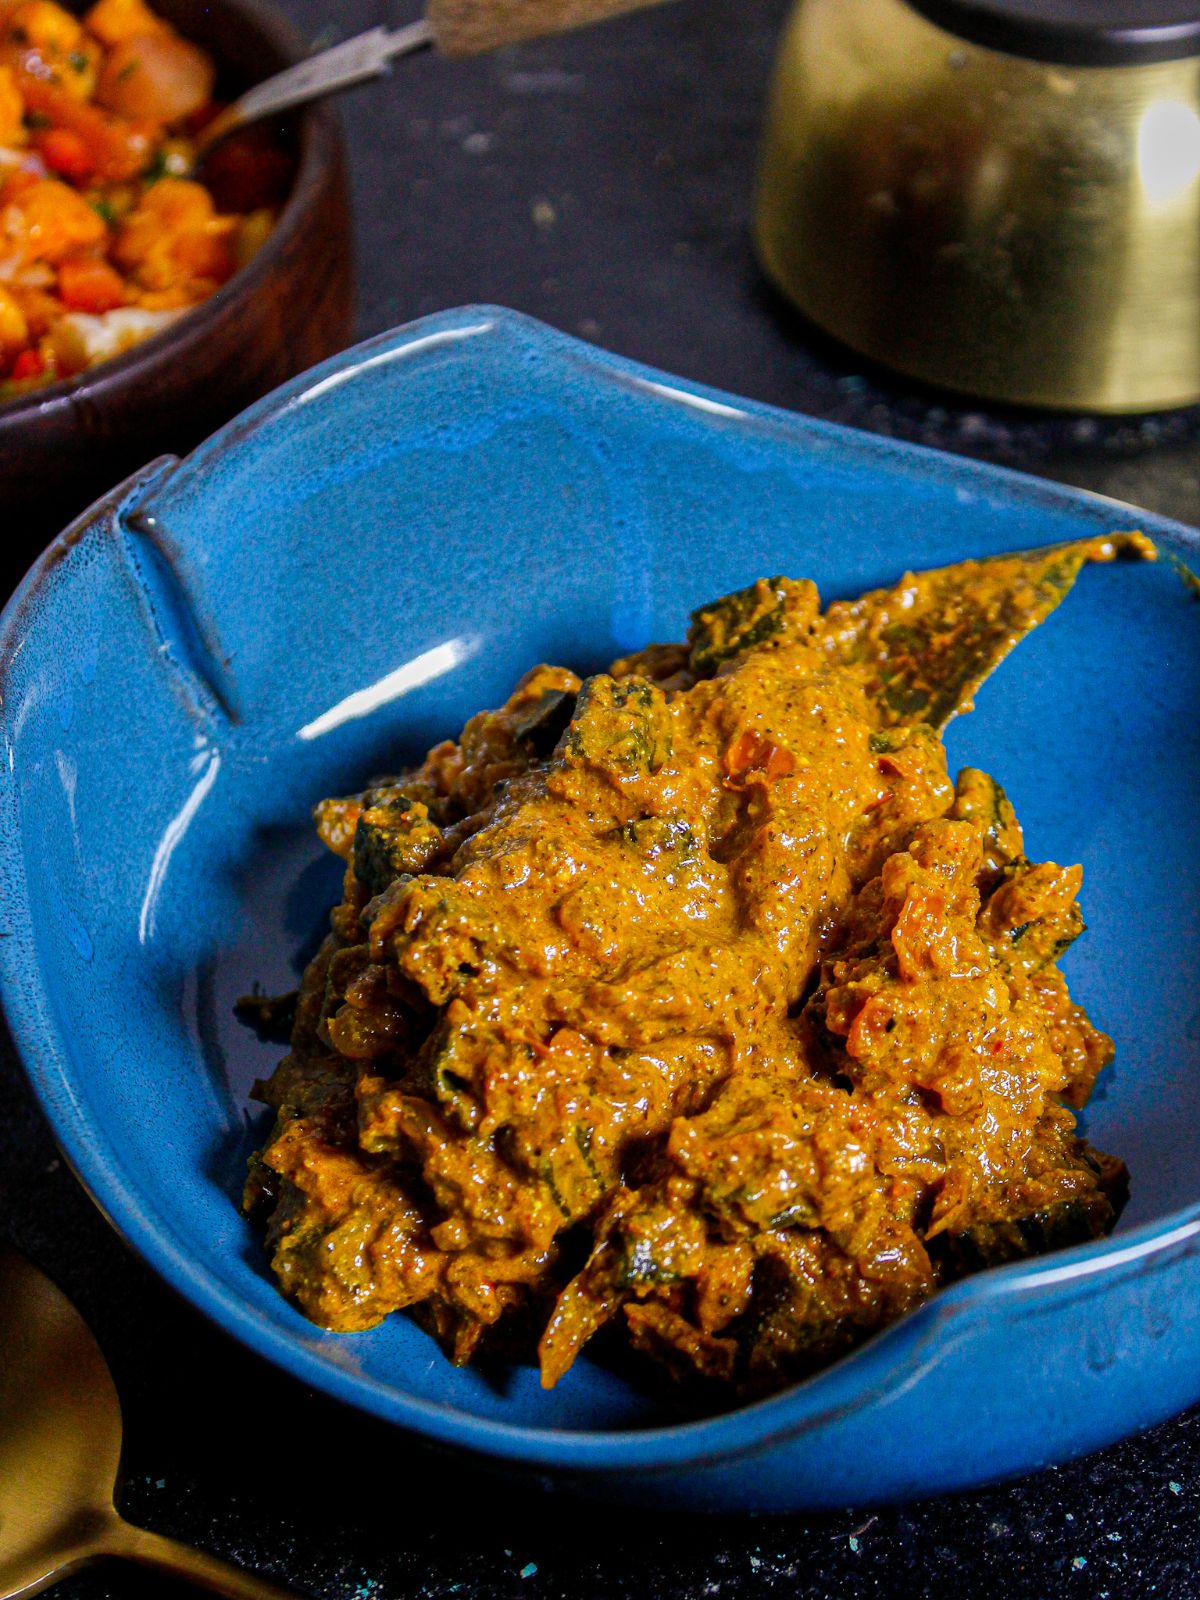 Delicious Bengali Shorshe Bhindi served in a blue bowl